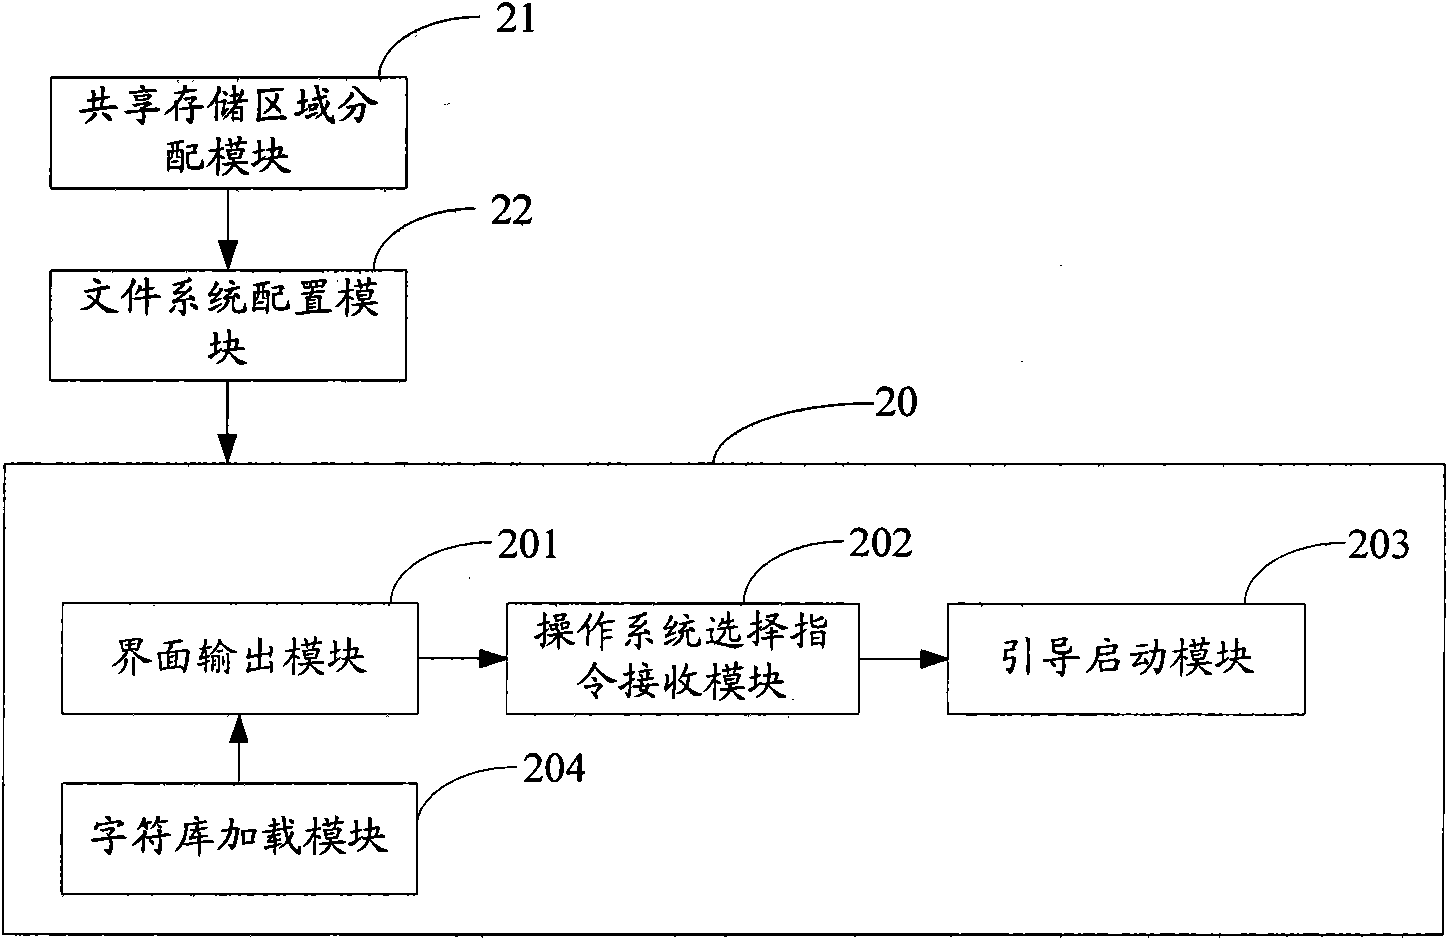 Guide method for mobile terminal operating system and mobile terminal